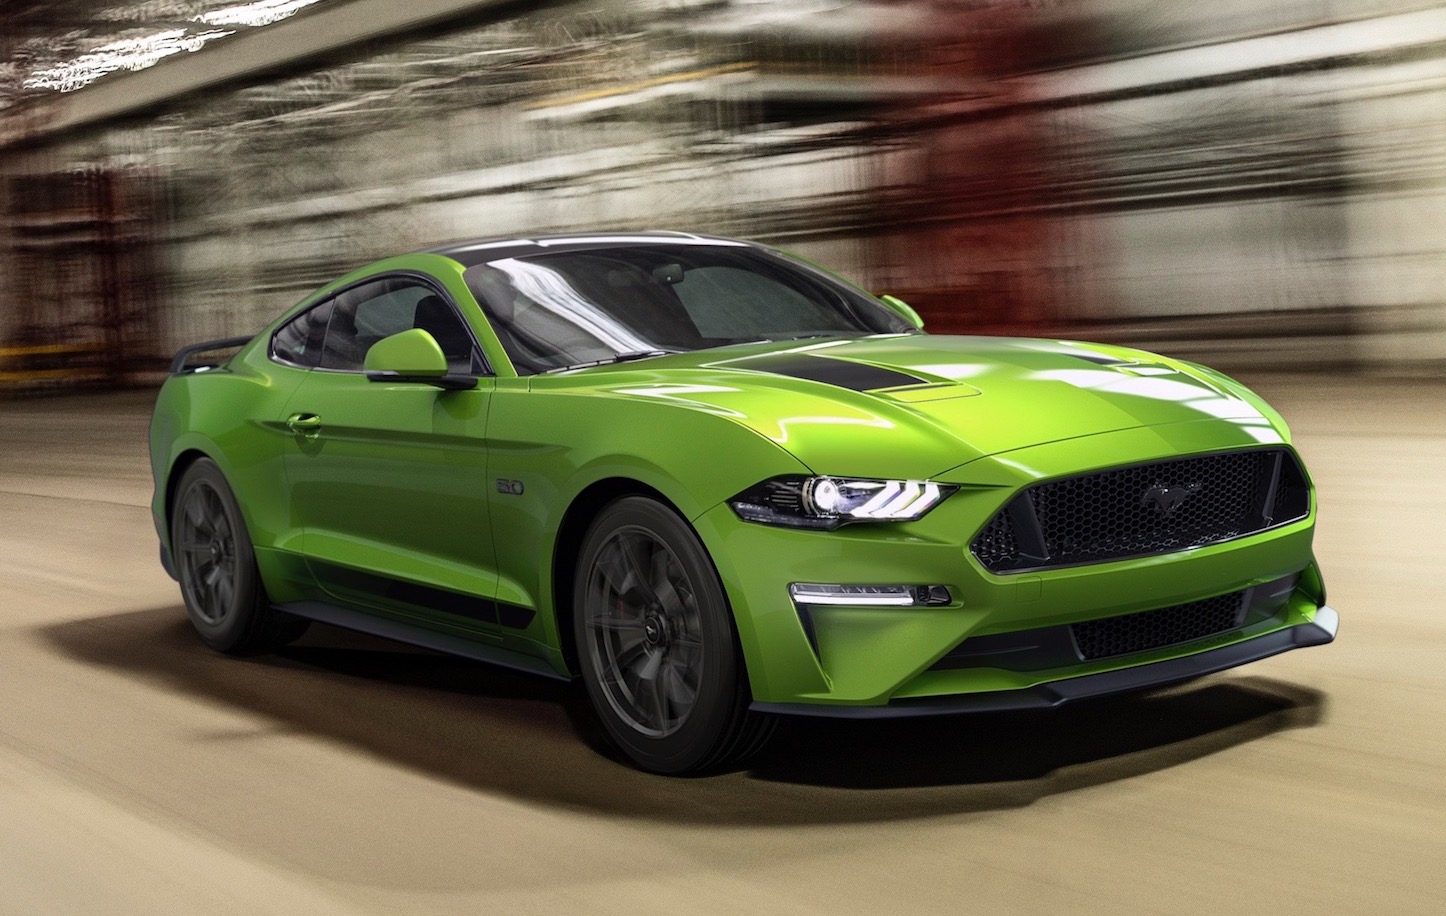 MY2020 Ford Mustang debuts with Black Shadow Pack